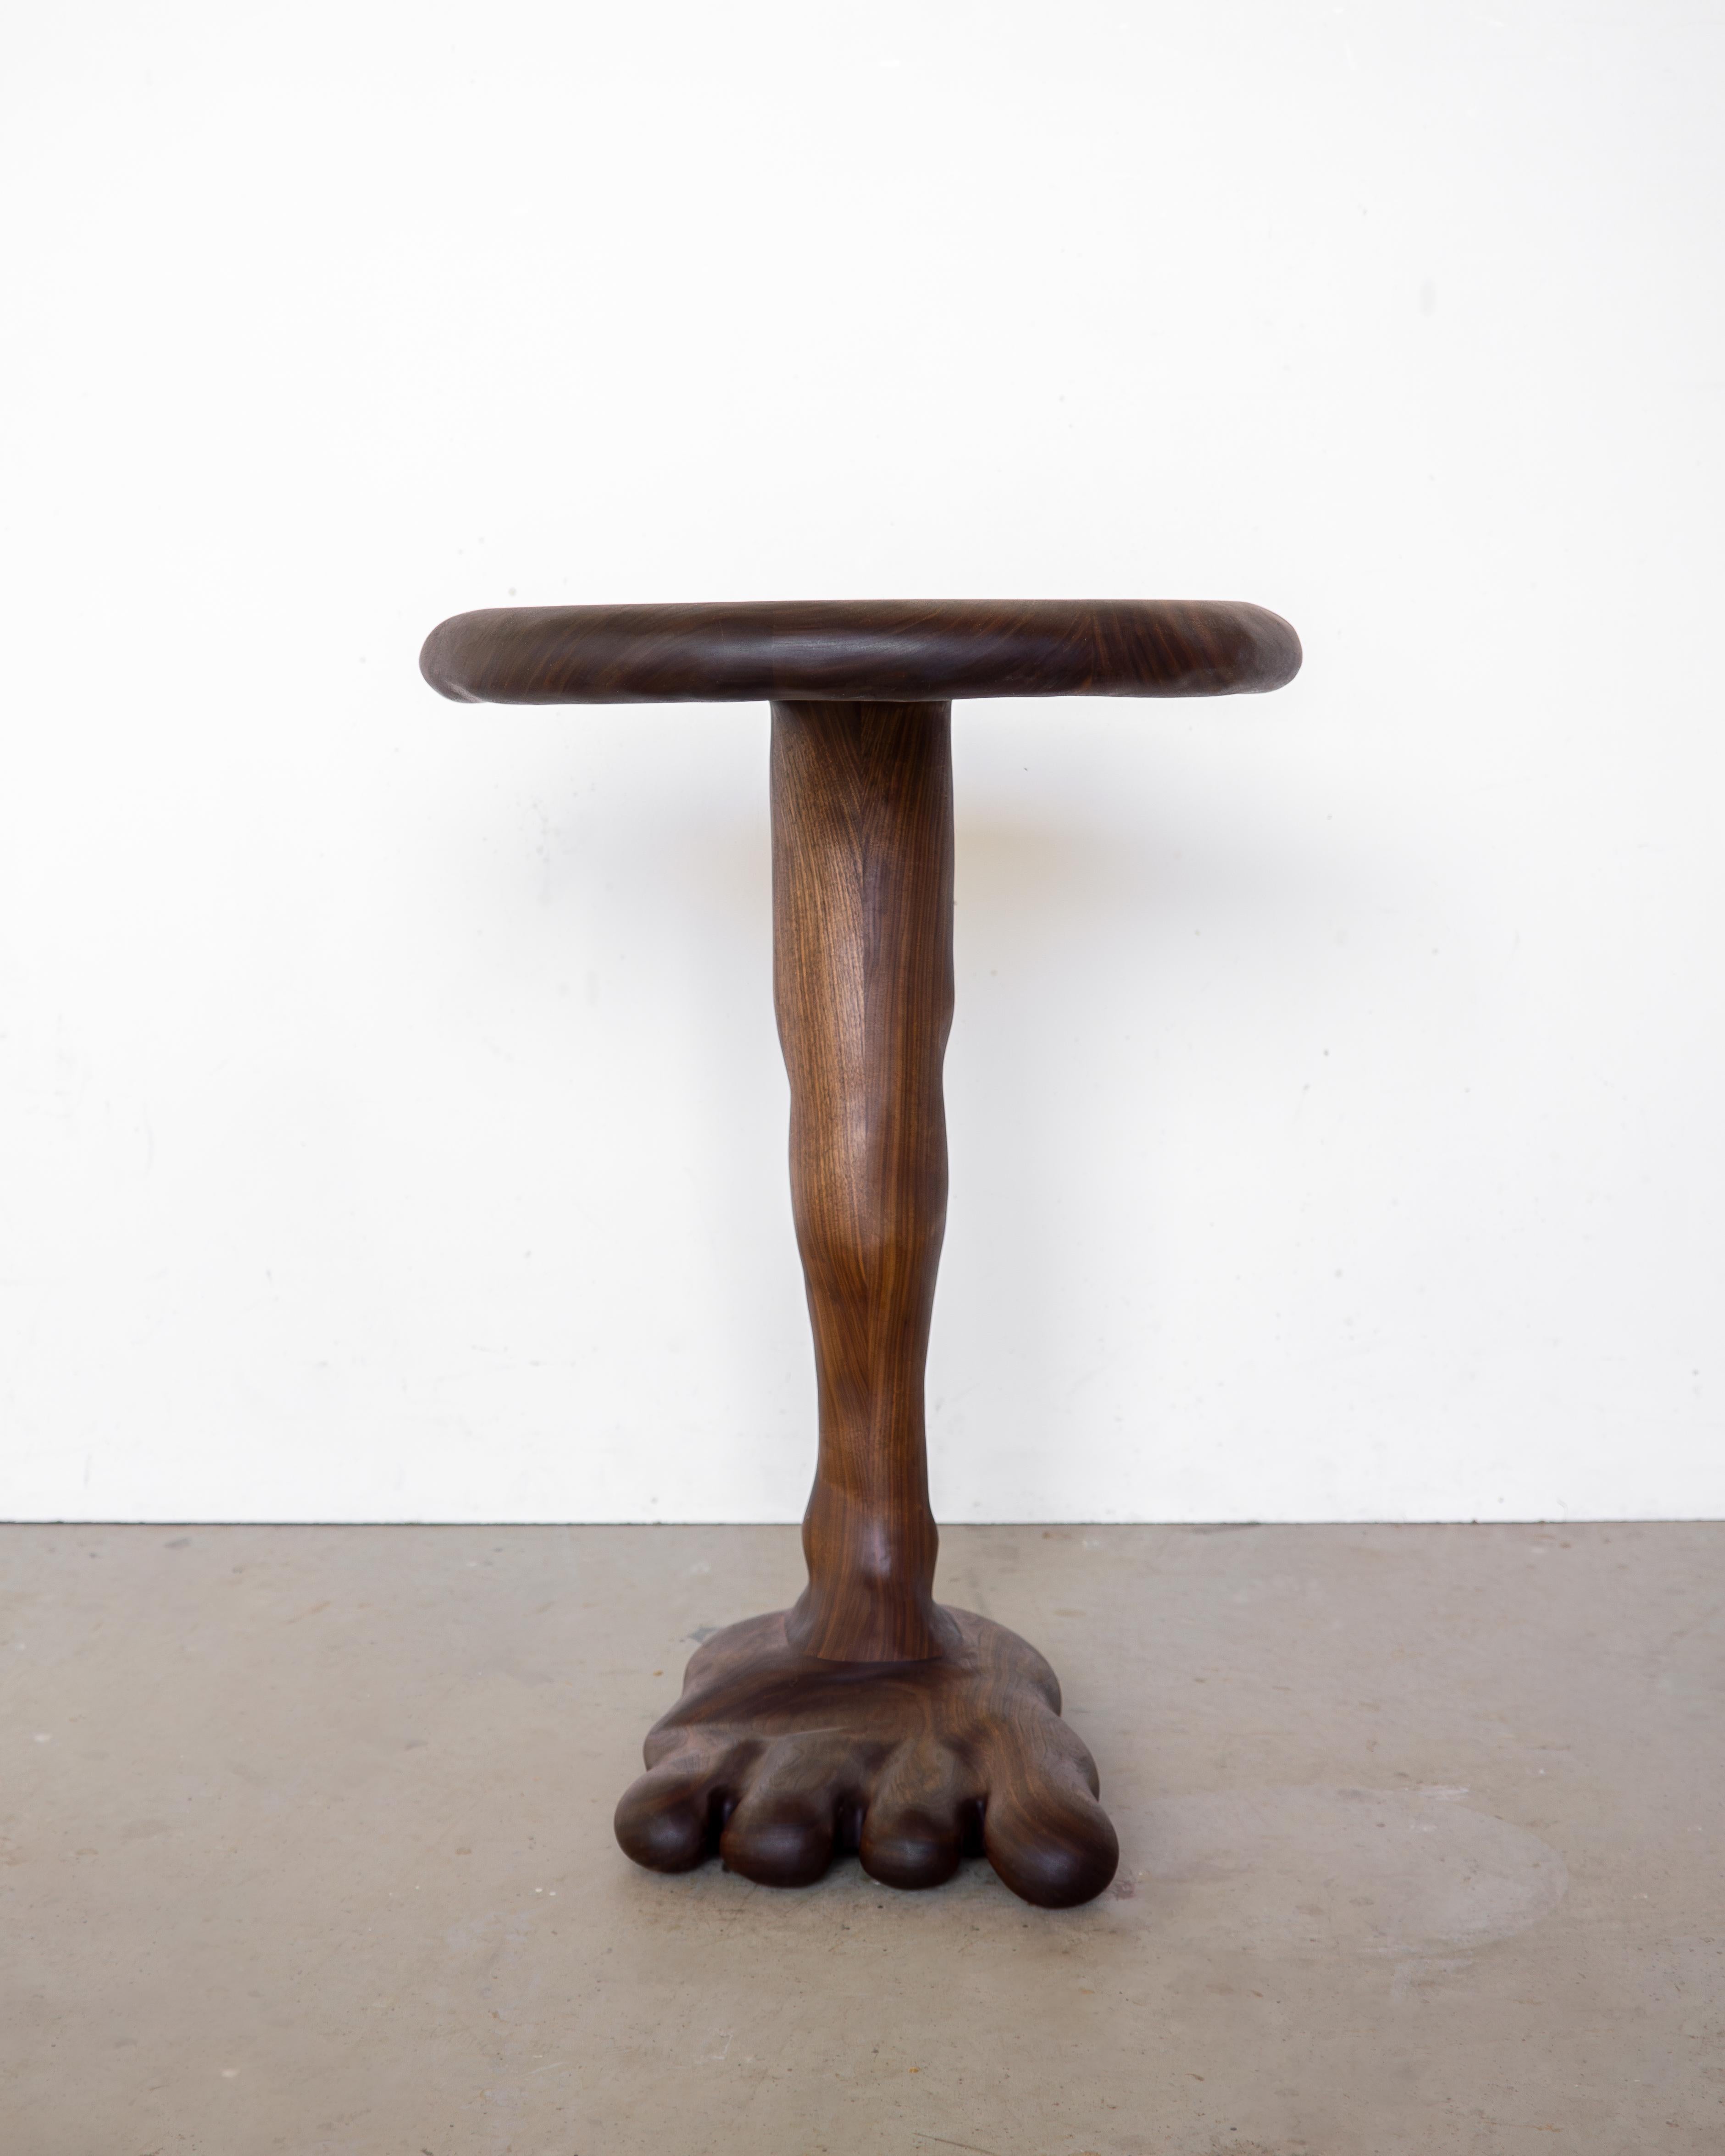 German The Leg Side Table - Sculptural Table in Walnut Wood For Sale